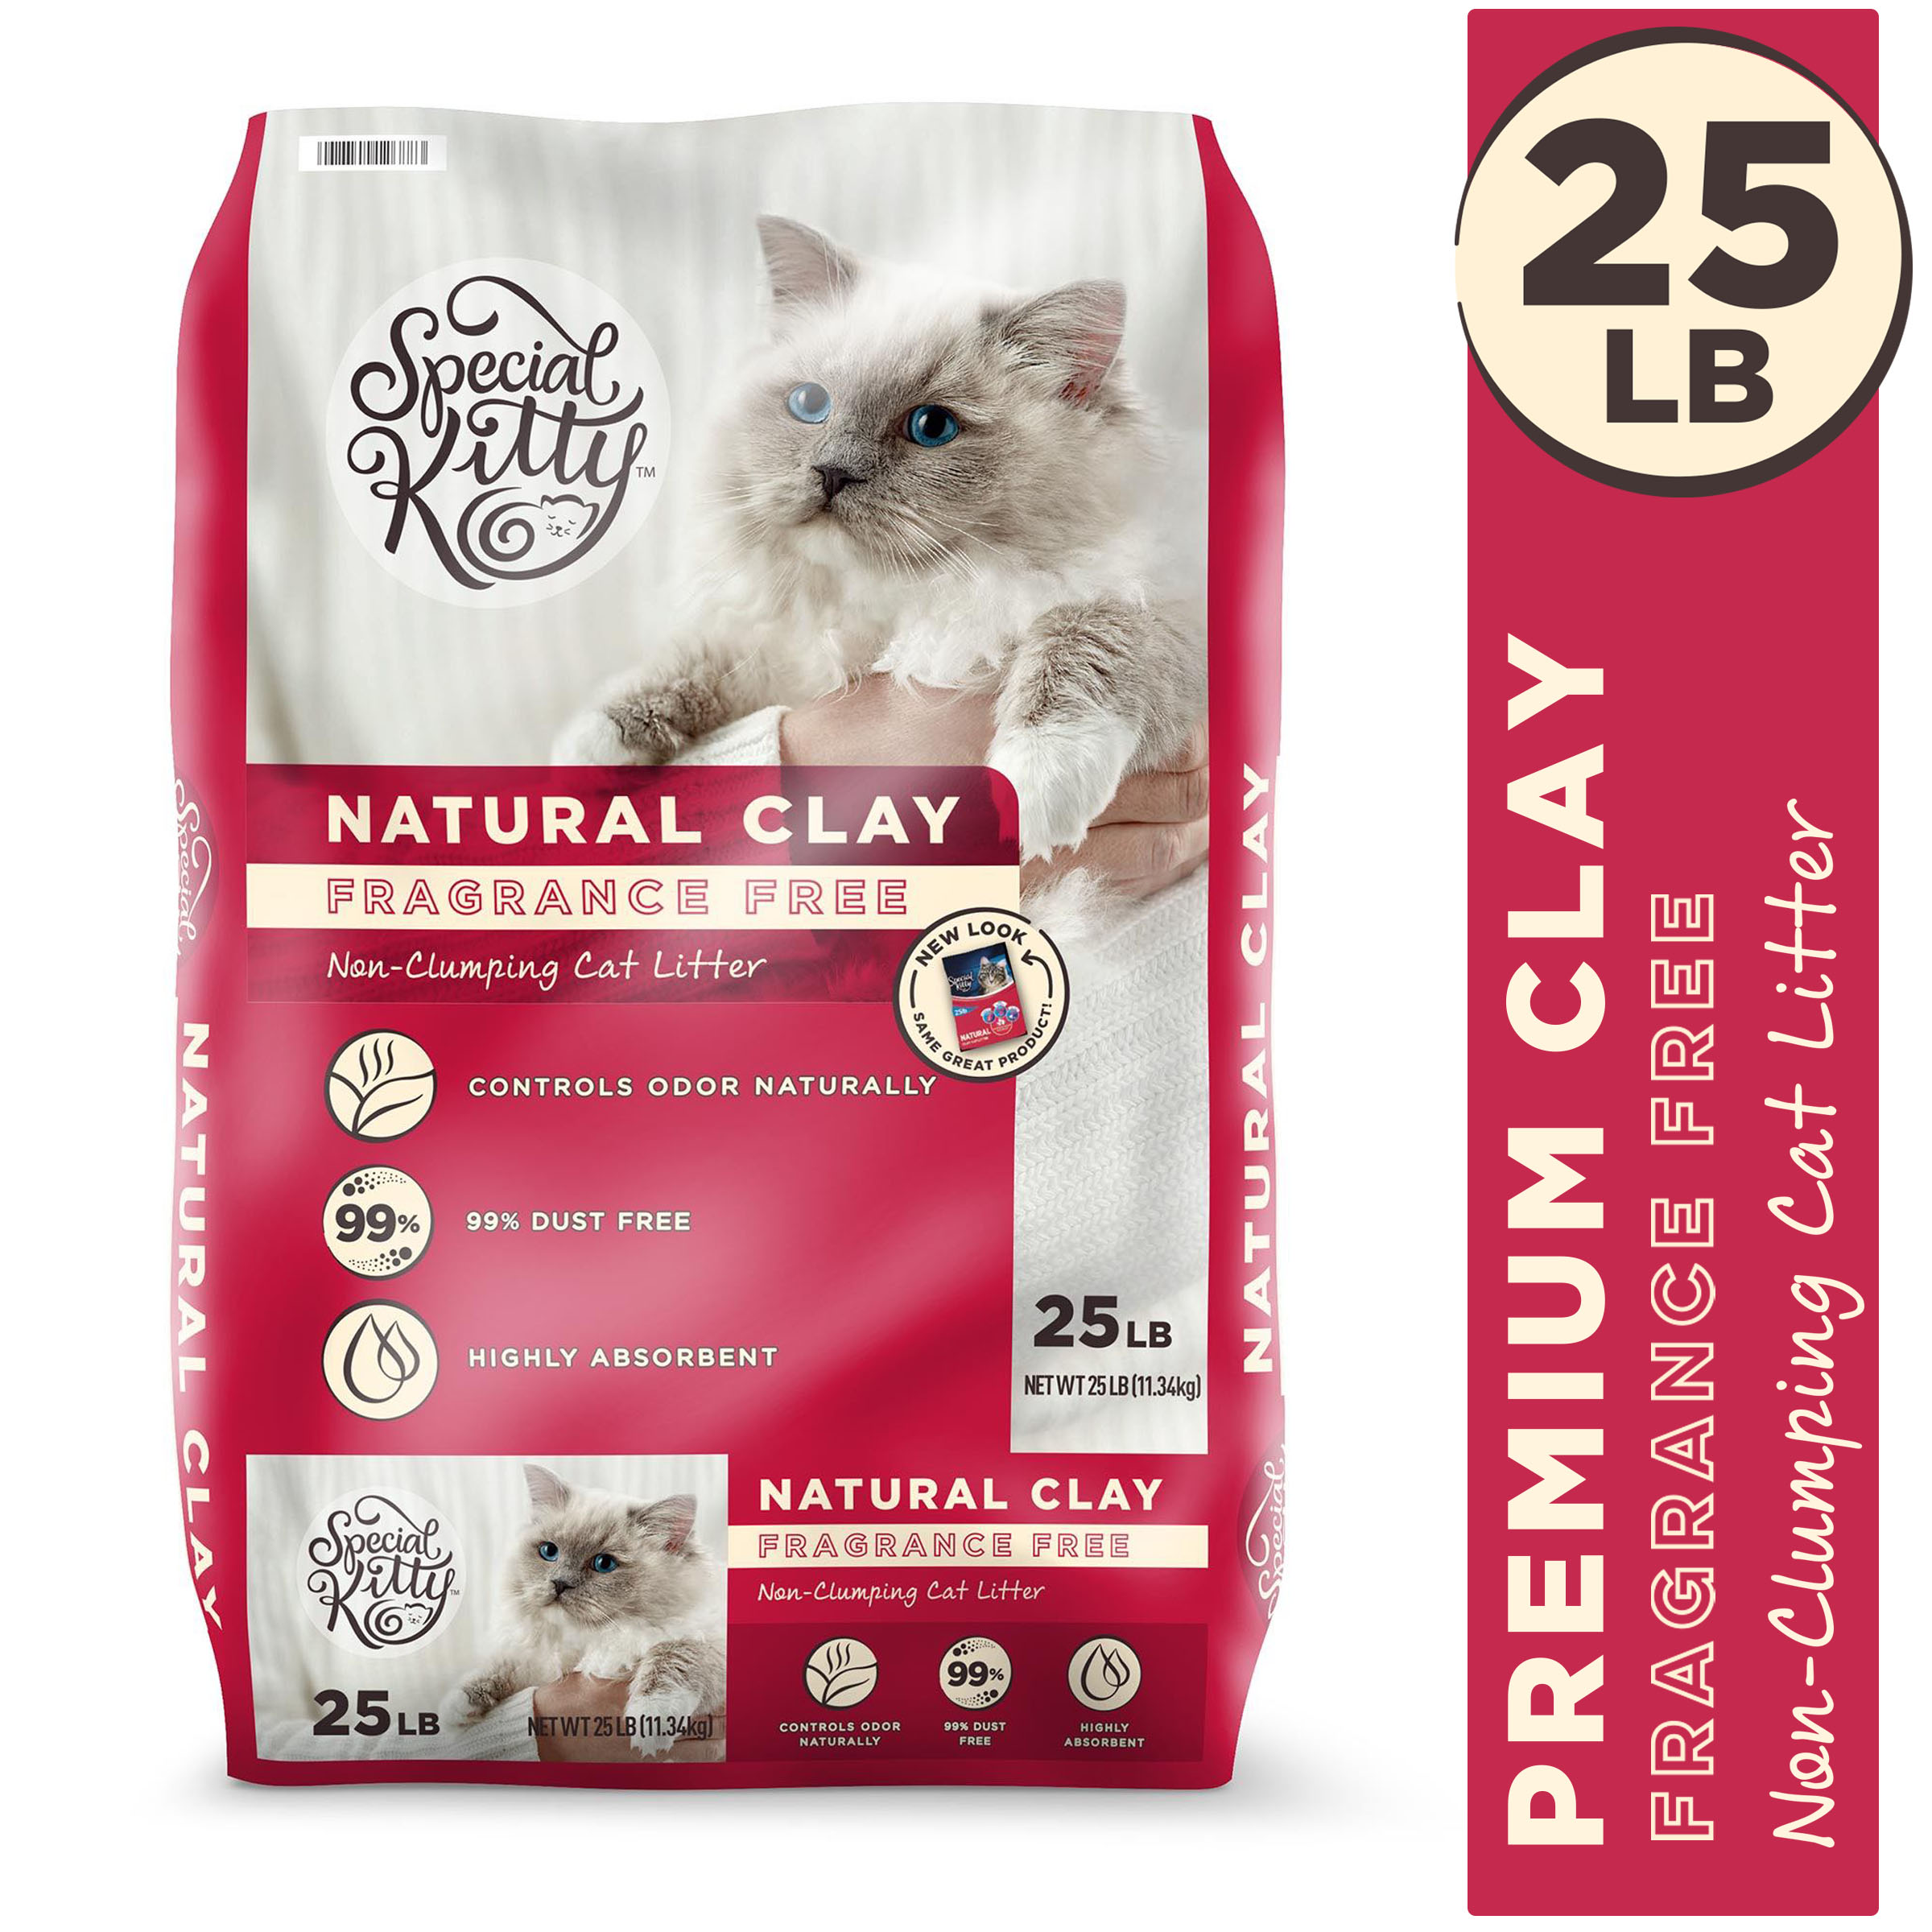 Special Kitty Fragrance Free Natural Clay Non-Clumping Cat Litter, 25 lb - image 1 of 10